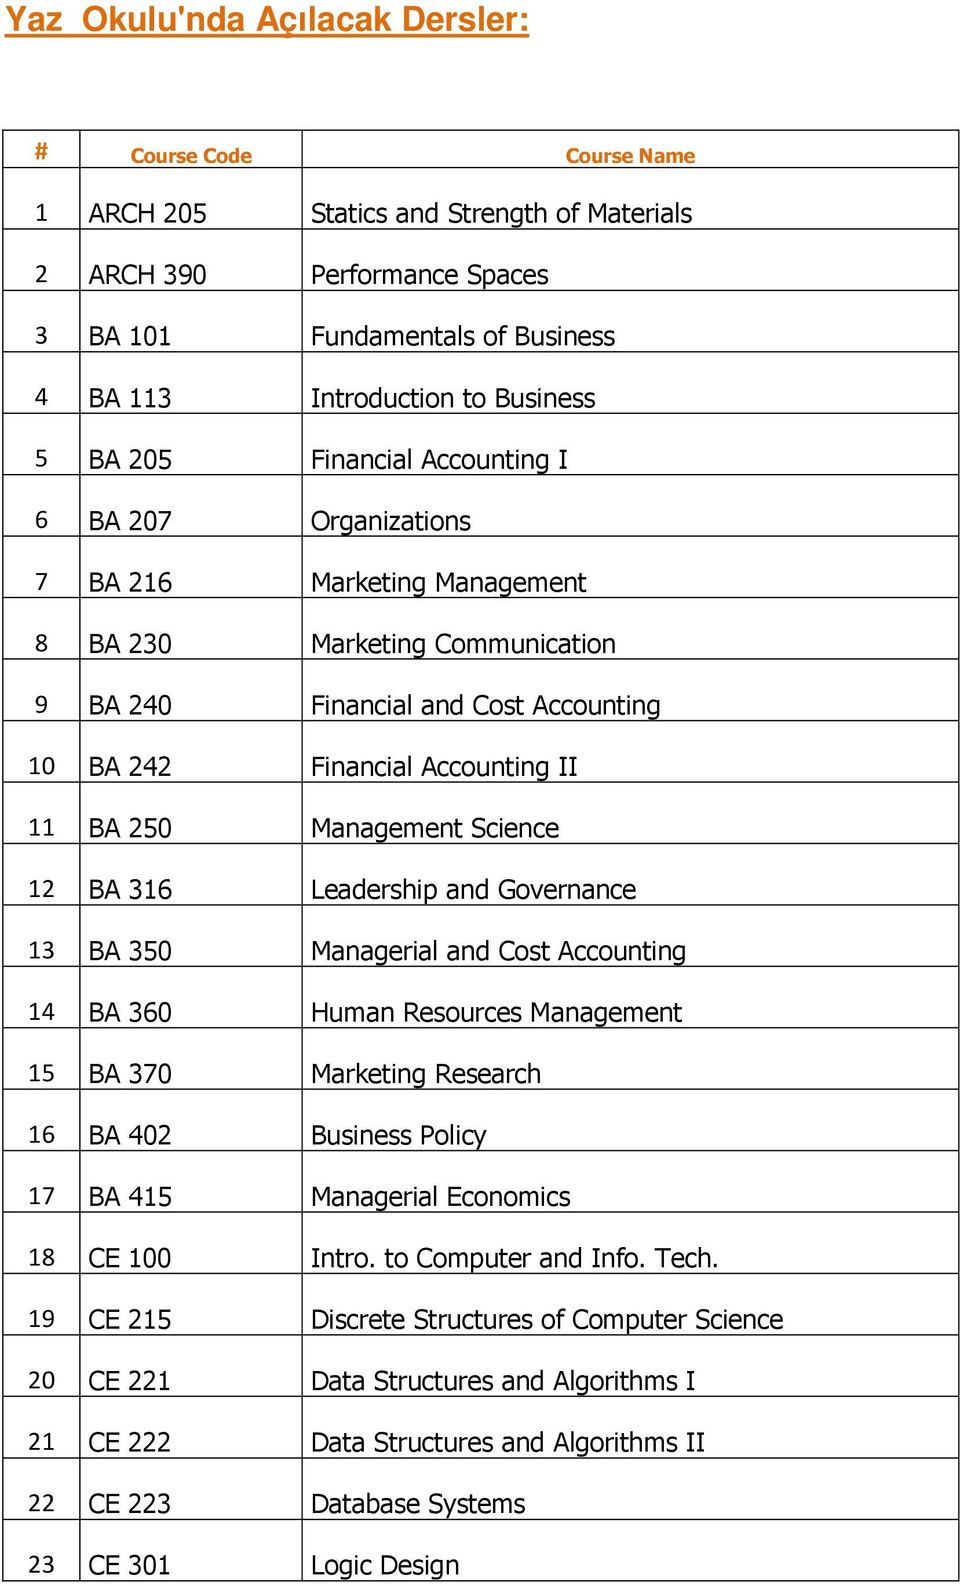 11 BA 250 Management Science 12 BA 316 Leadership and Governance 13 BA 350 Managerial and Cost Accounting 14 BA 360 Human Resources Management 15 BA 370 Marketing Research 16 BA 402 Business Policy